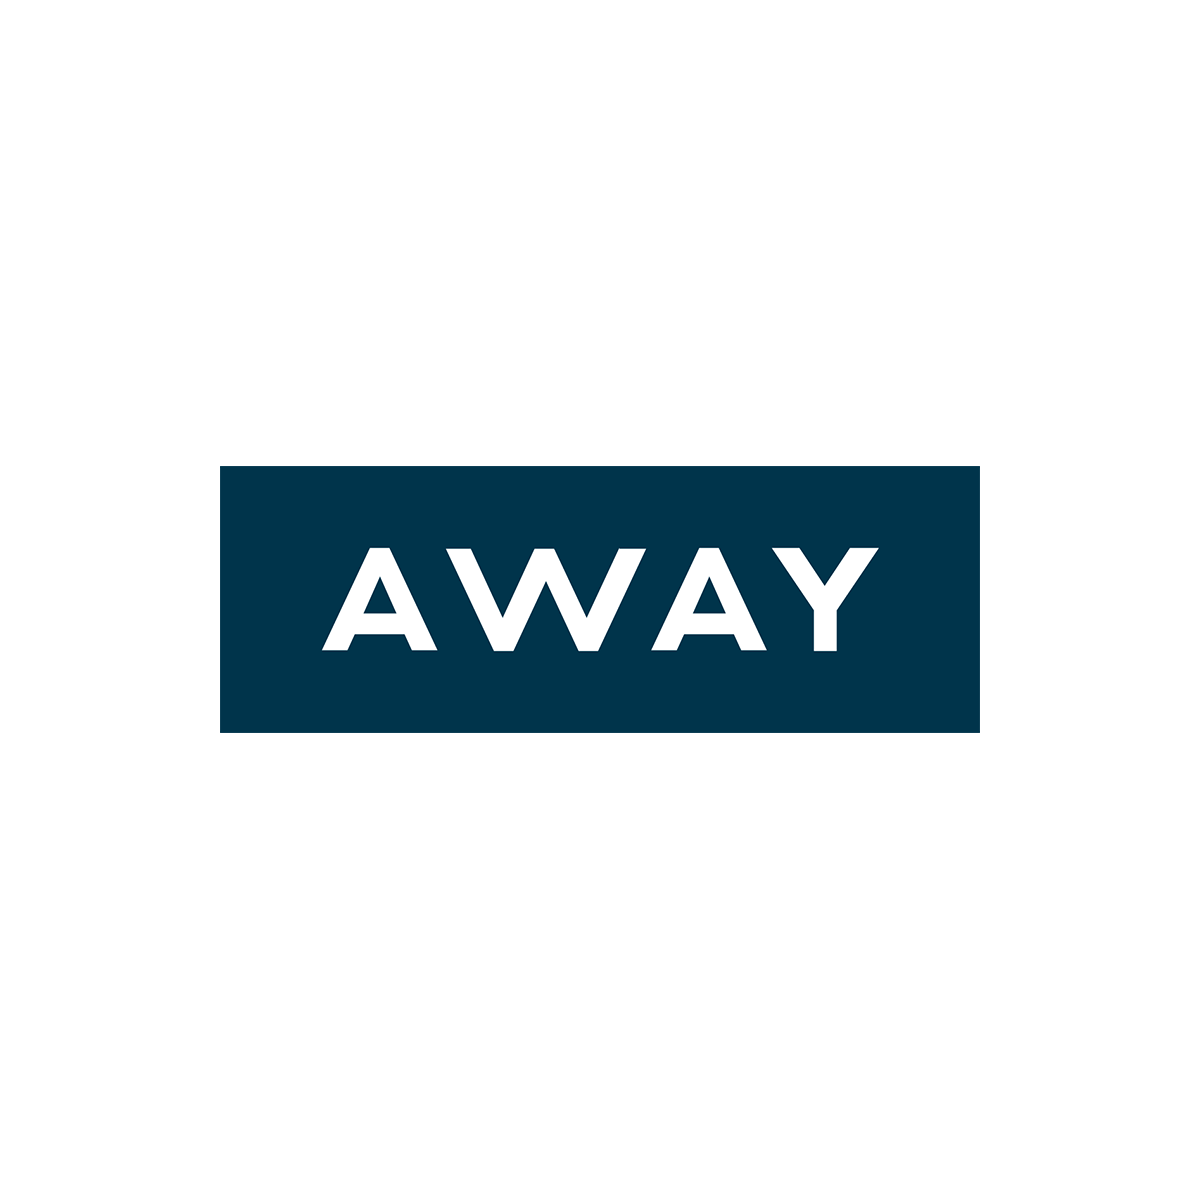 Away Travel Promo Code For 20 Off